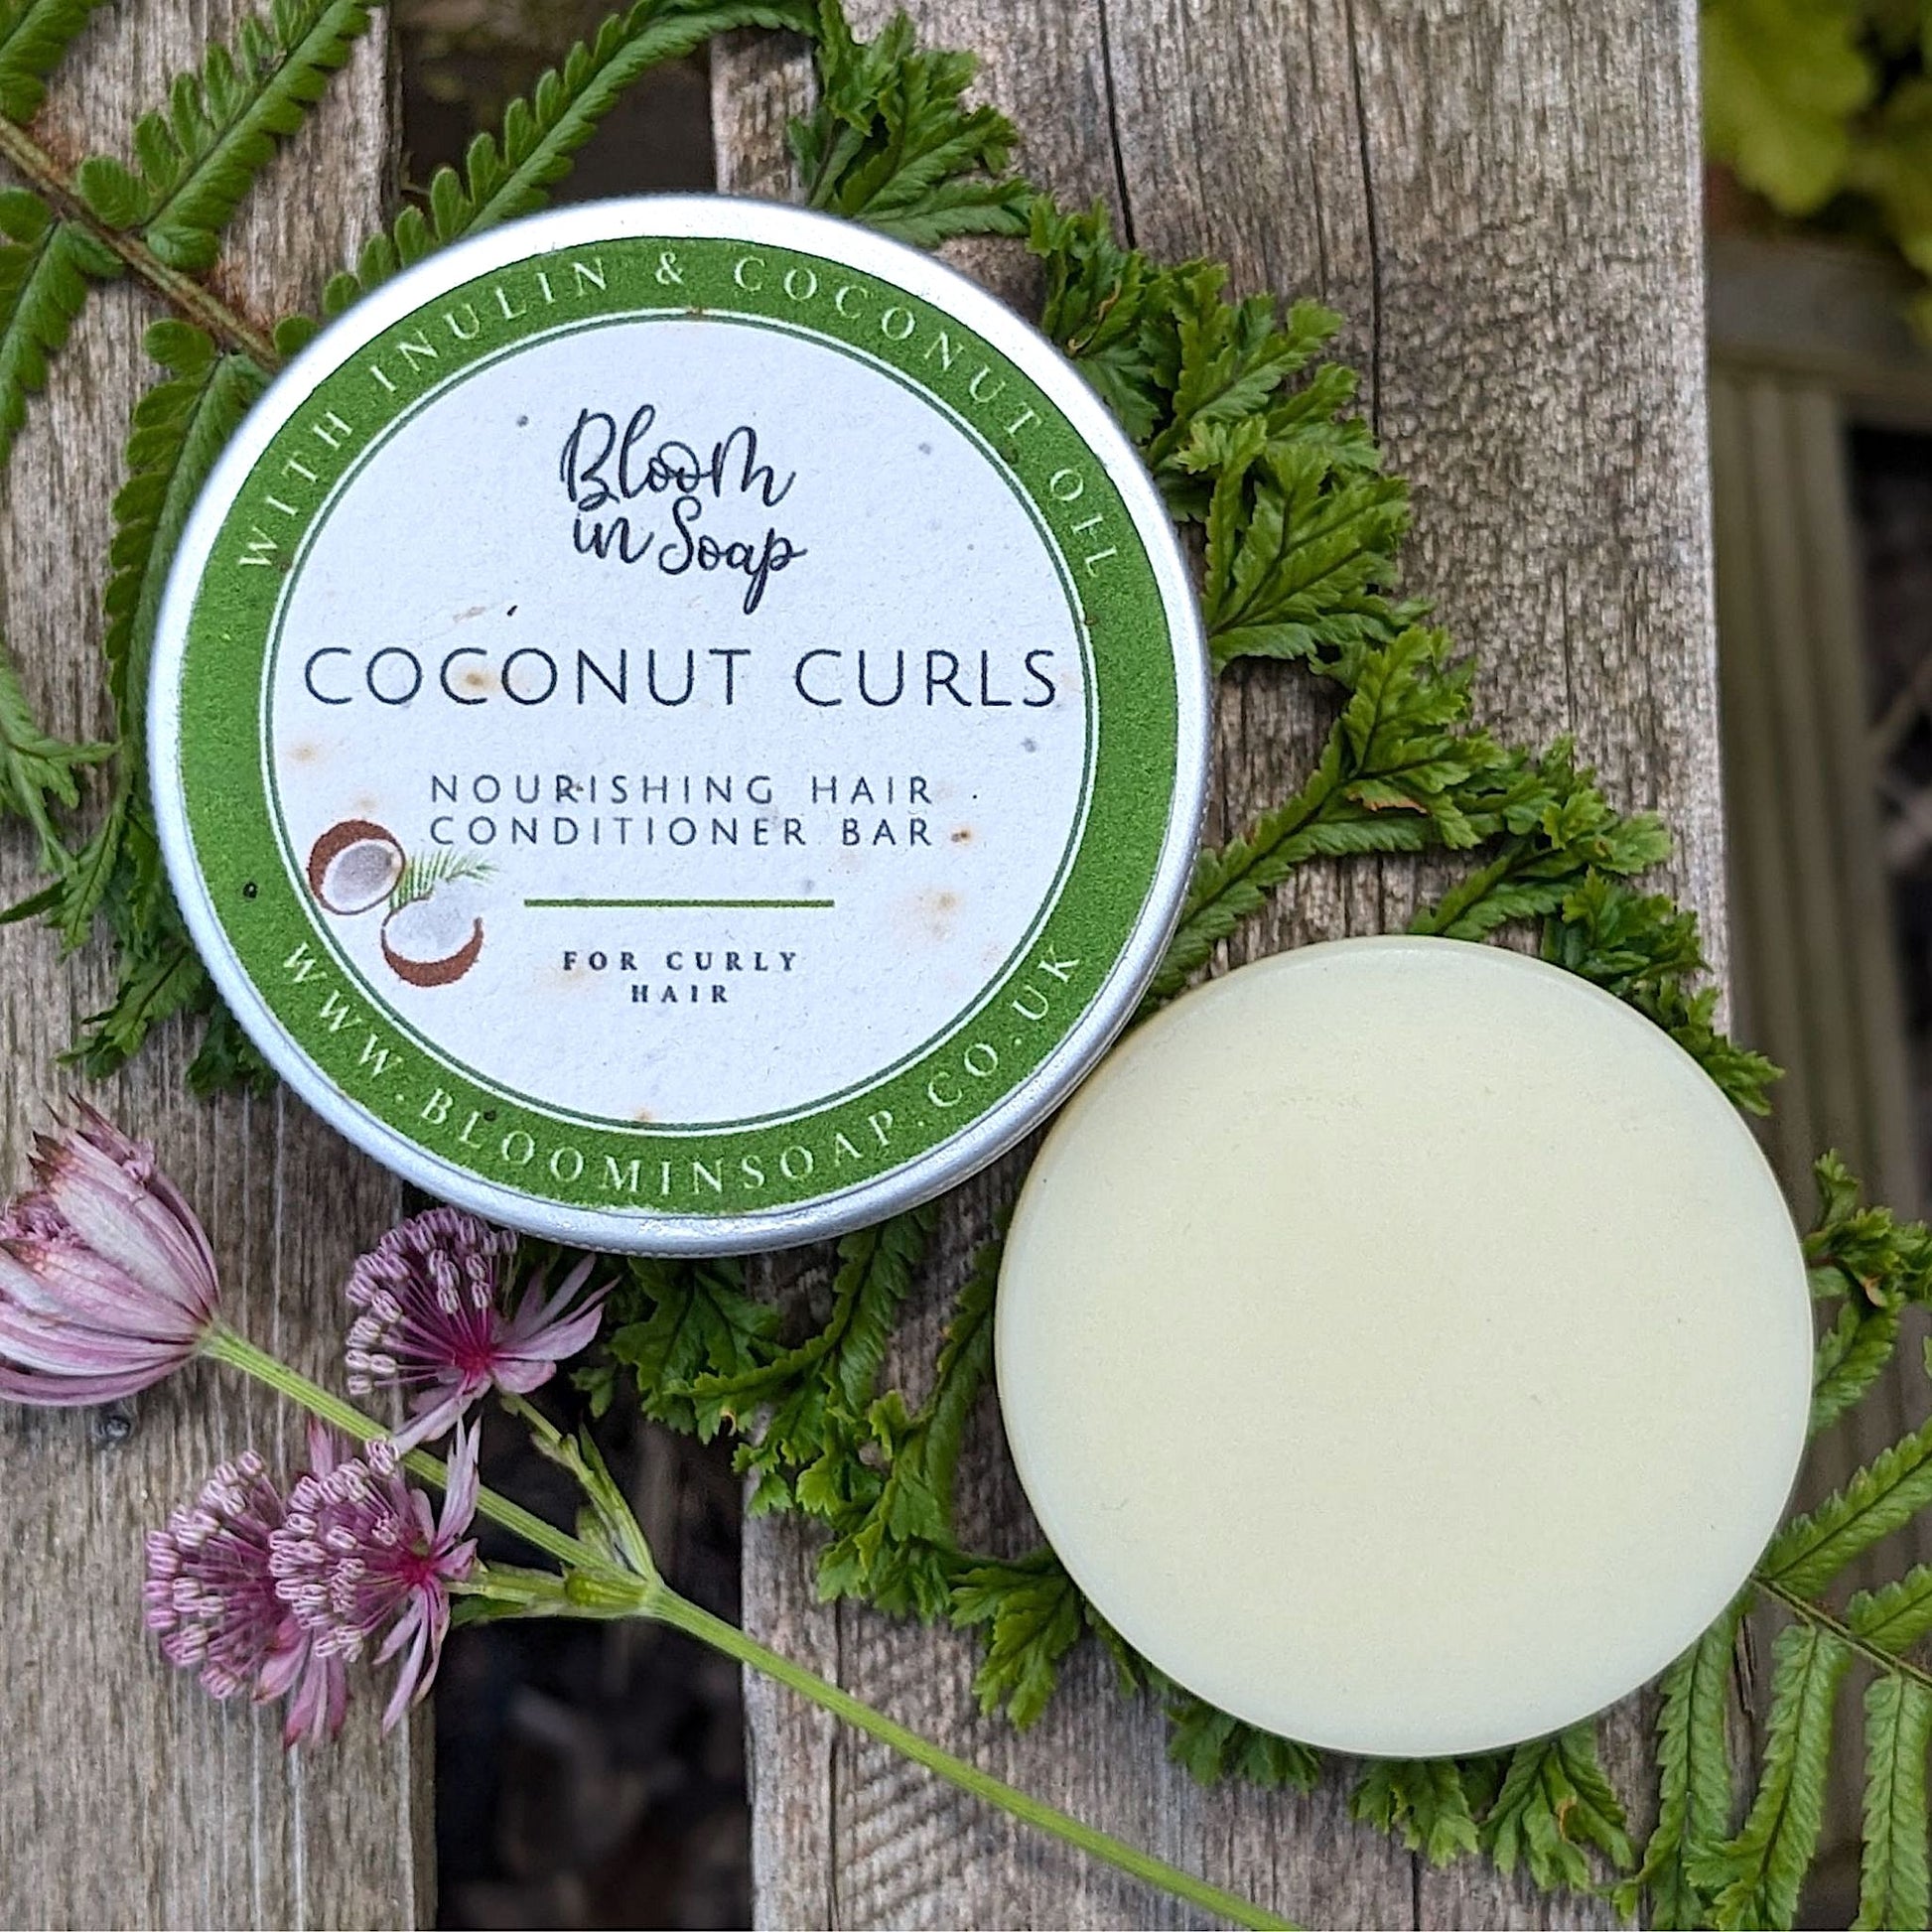 Coconut Curls conditioner bar in a tin